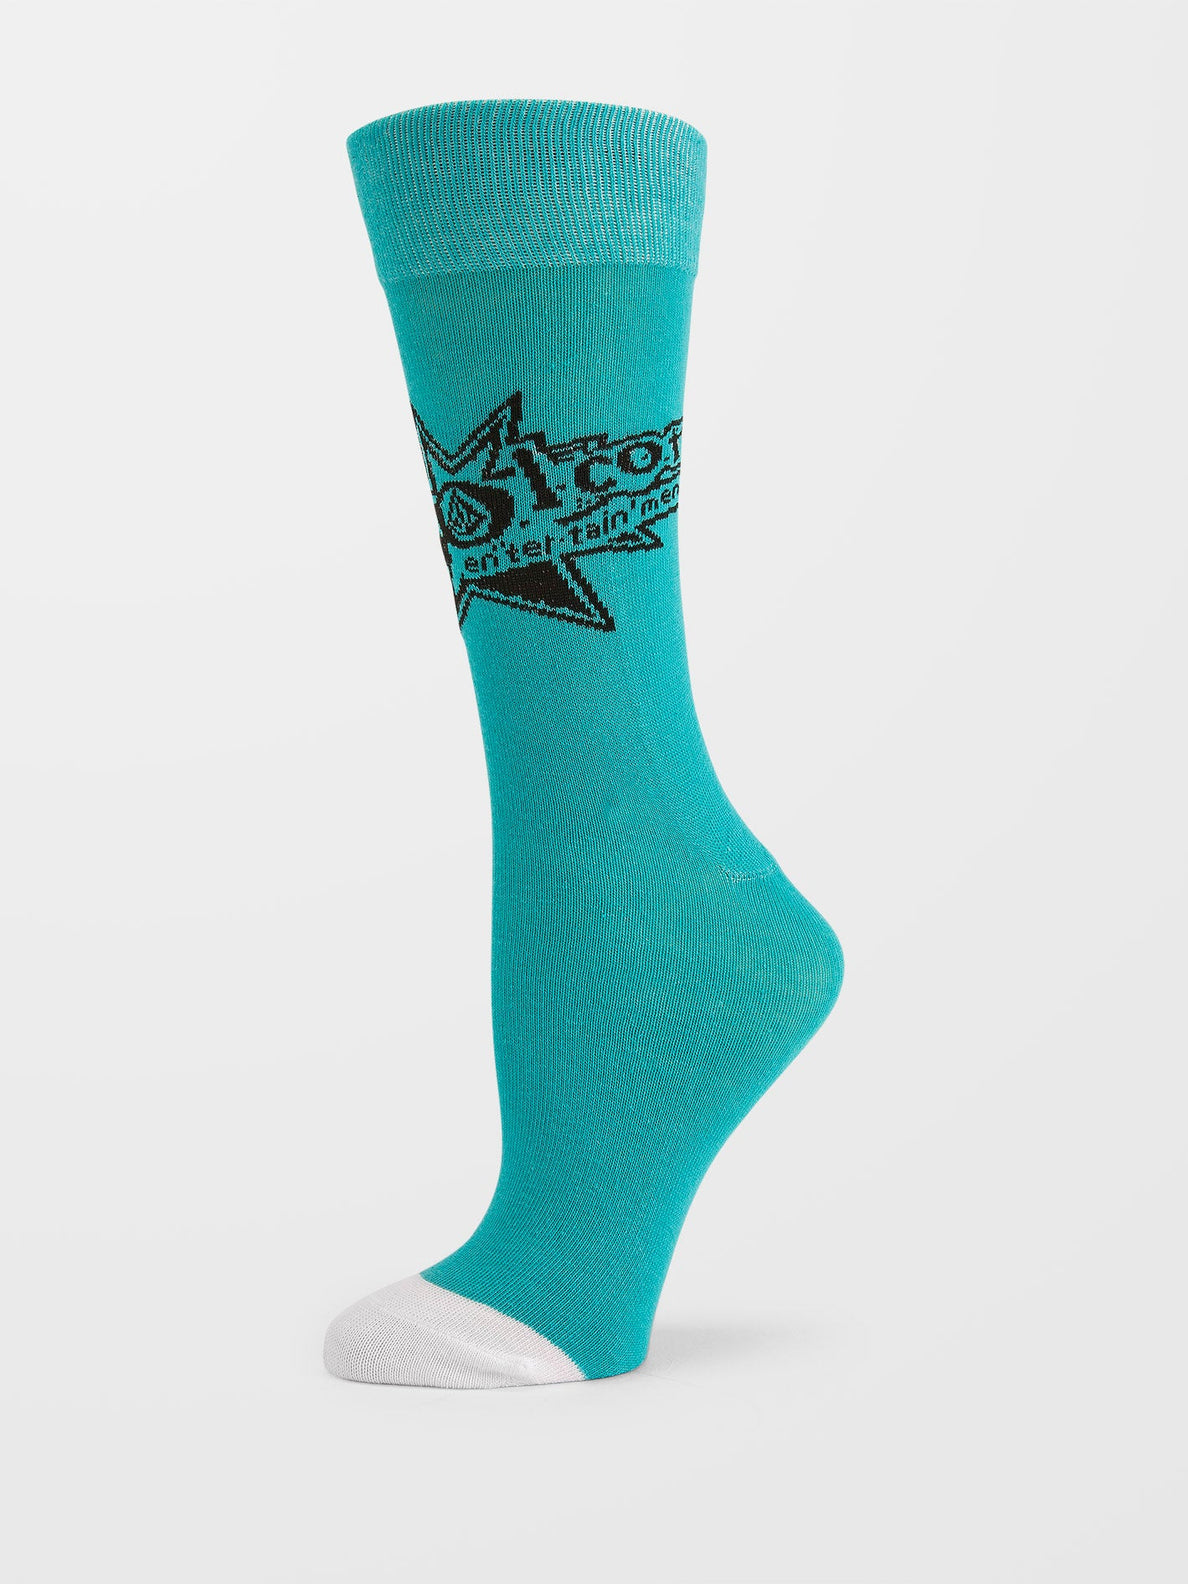 Calcetin Chica Volcom V Ent Sock - Temple Teal